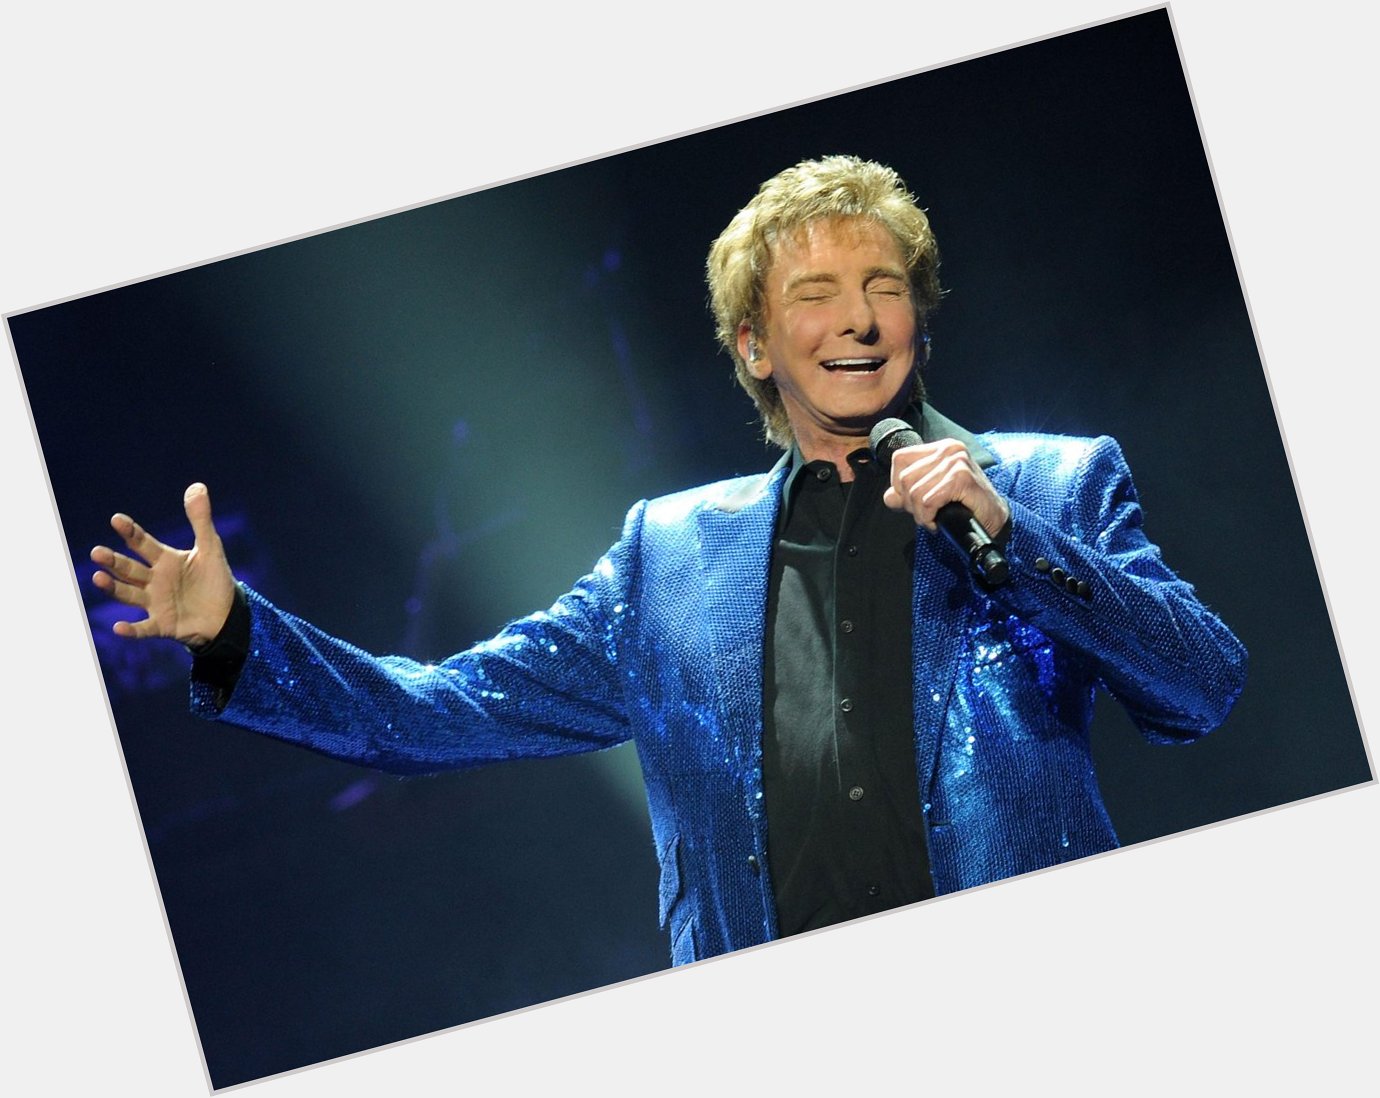 Happy birthday to 2012 Hall Of Fame inductee Barry Manilow! Have a great show tonight in Brooklyn! 